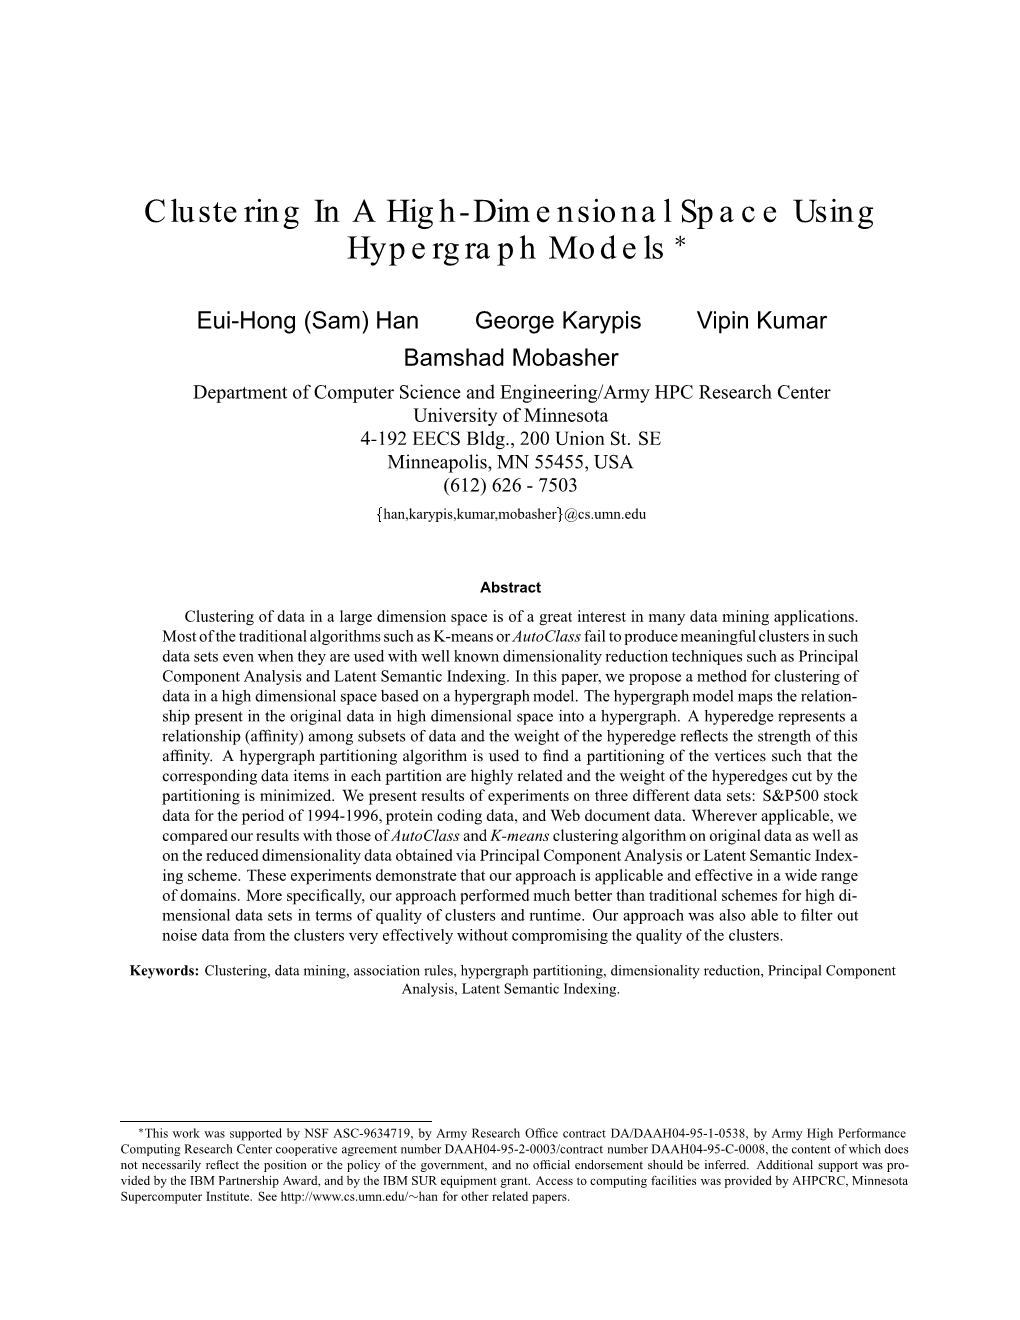 Clustering in a High-Dimensional Space Using Hypergraph Models ∗